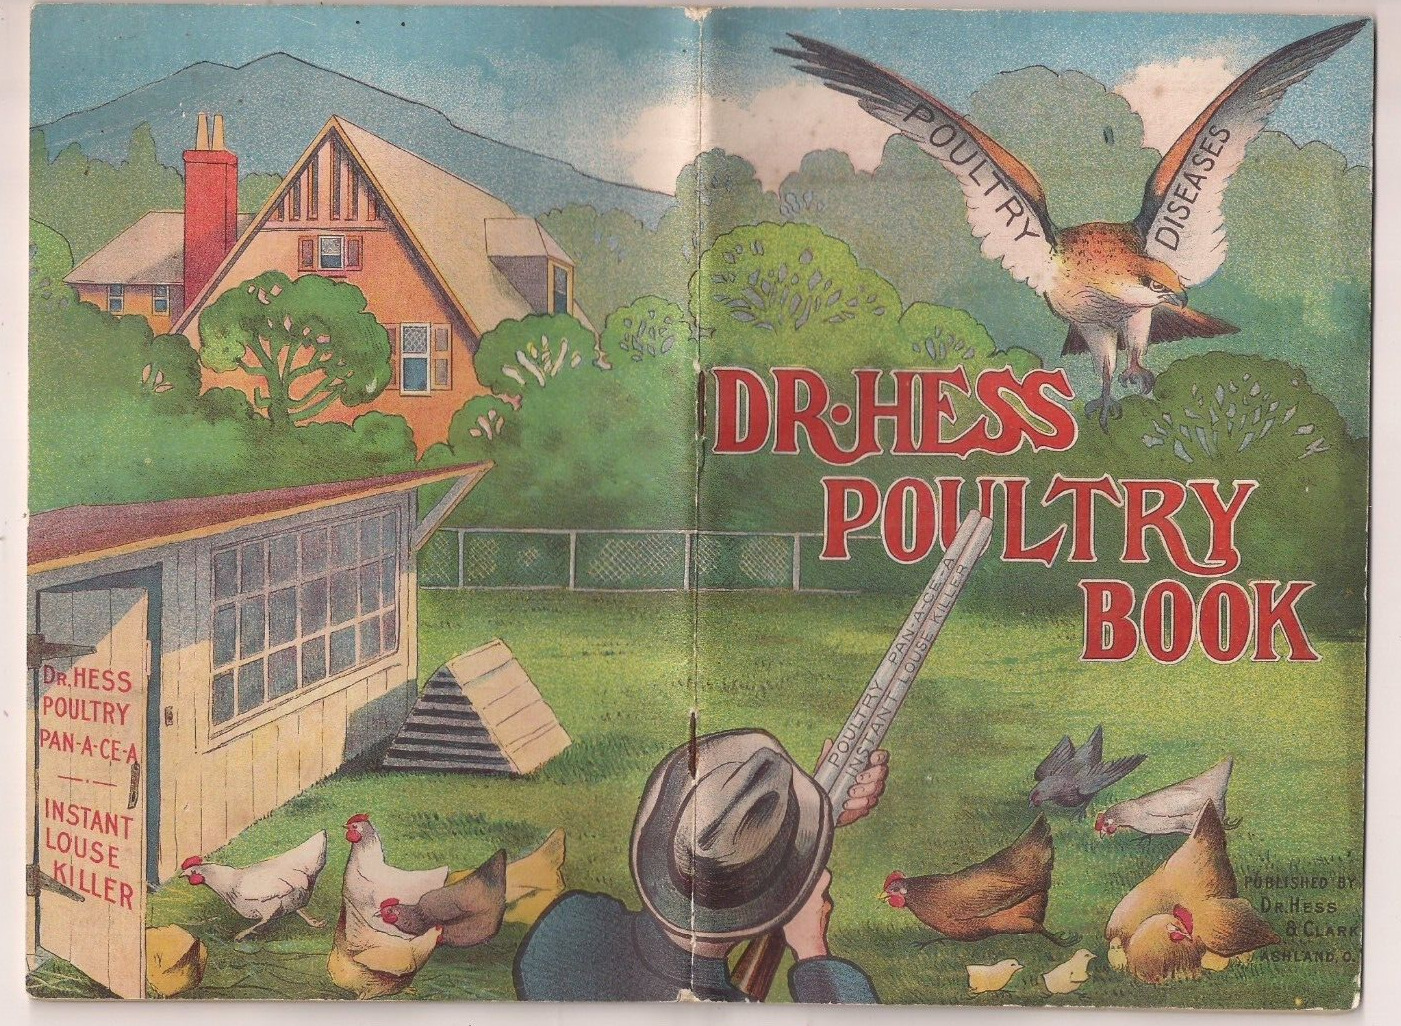 1904 Dr. Hess Poultry Diseases Booklet Ashland, Ohio